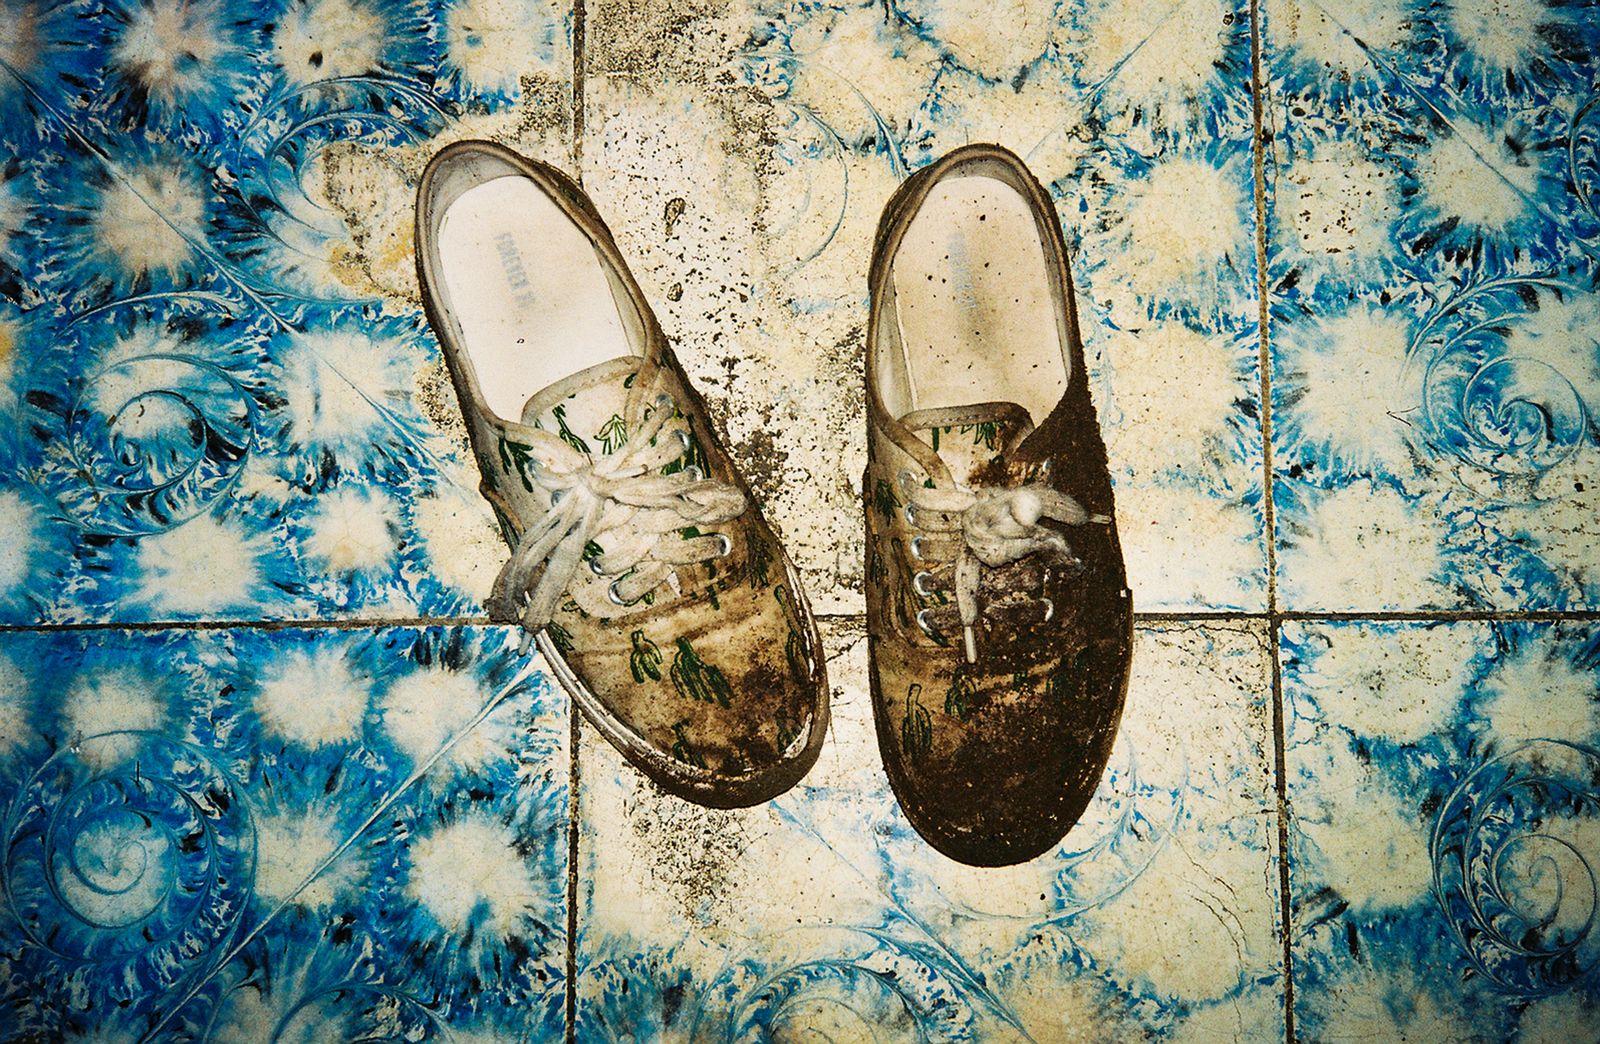 © Lisette Poole González - Muddy shoes after crossing the border into Honduras at night.